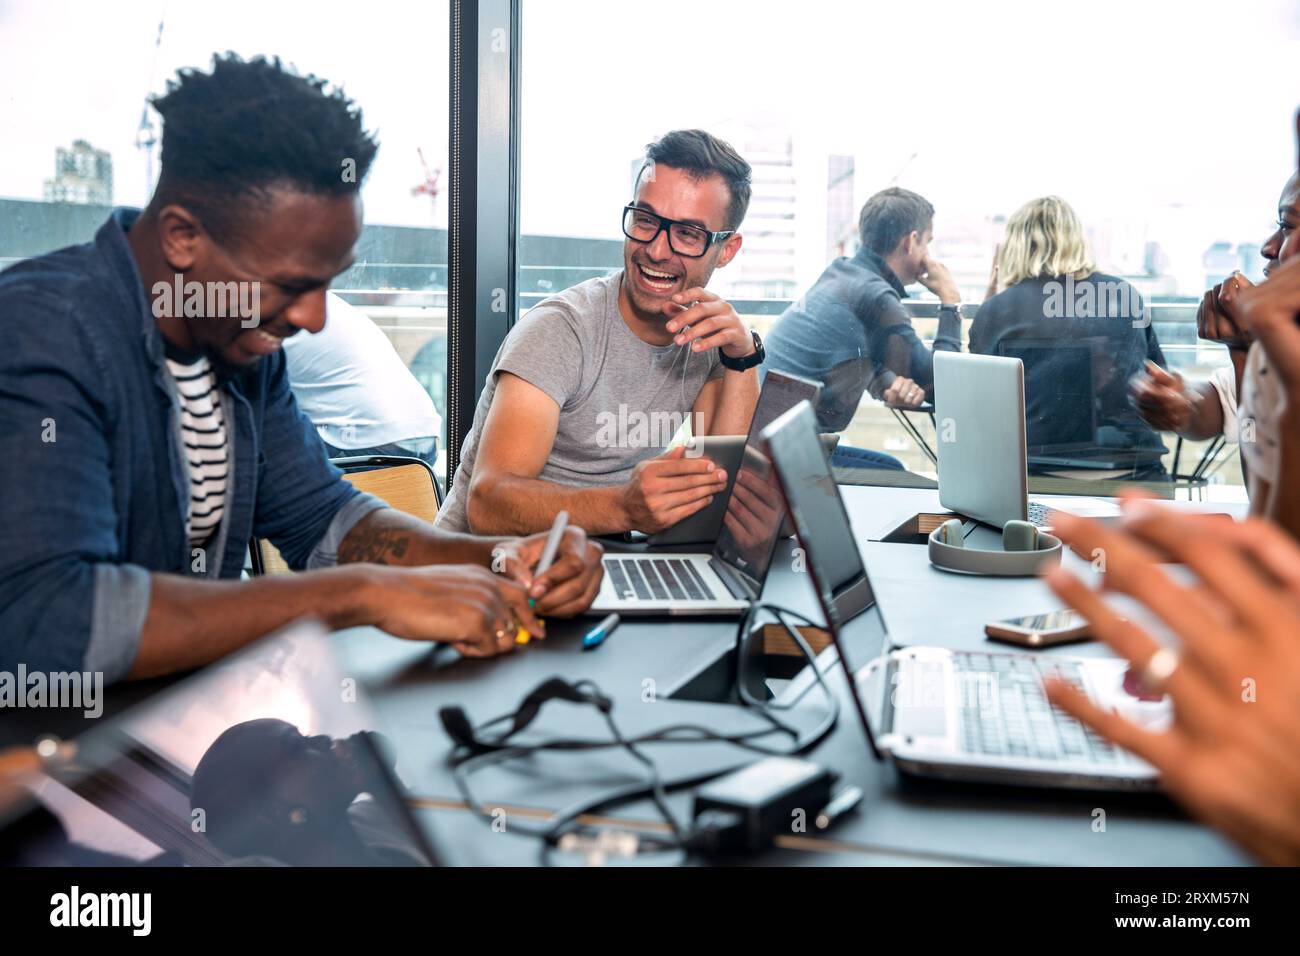 Colleagues using laptops during meeting Stock Photo